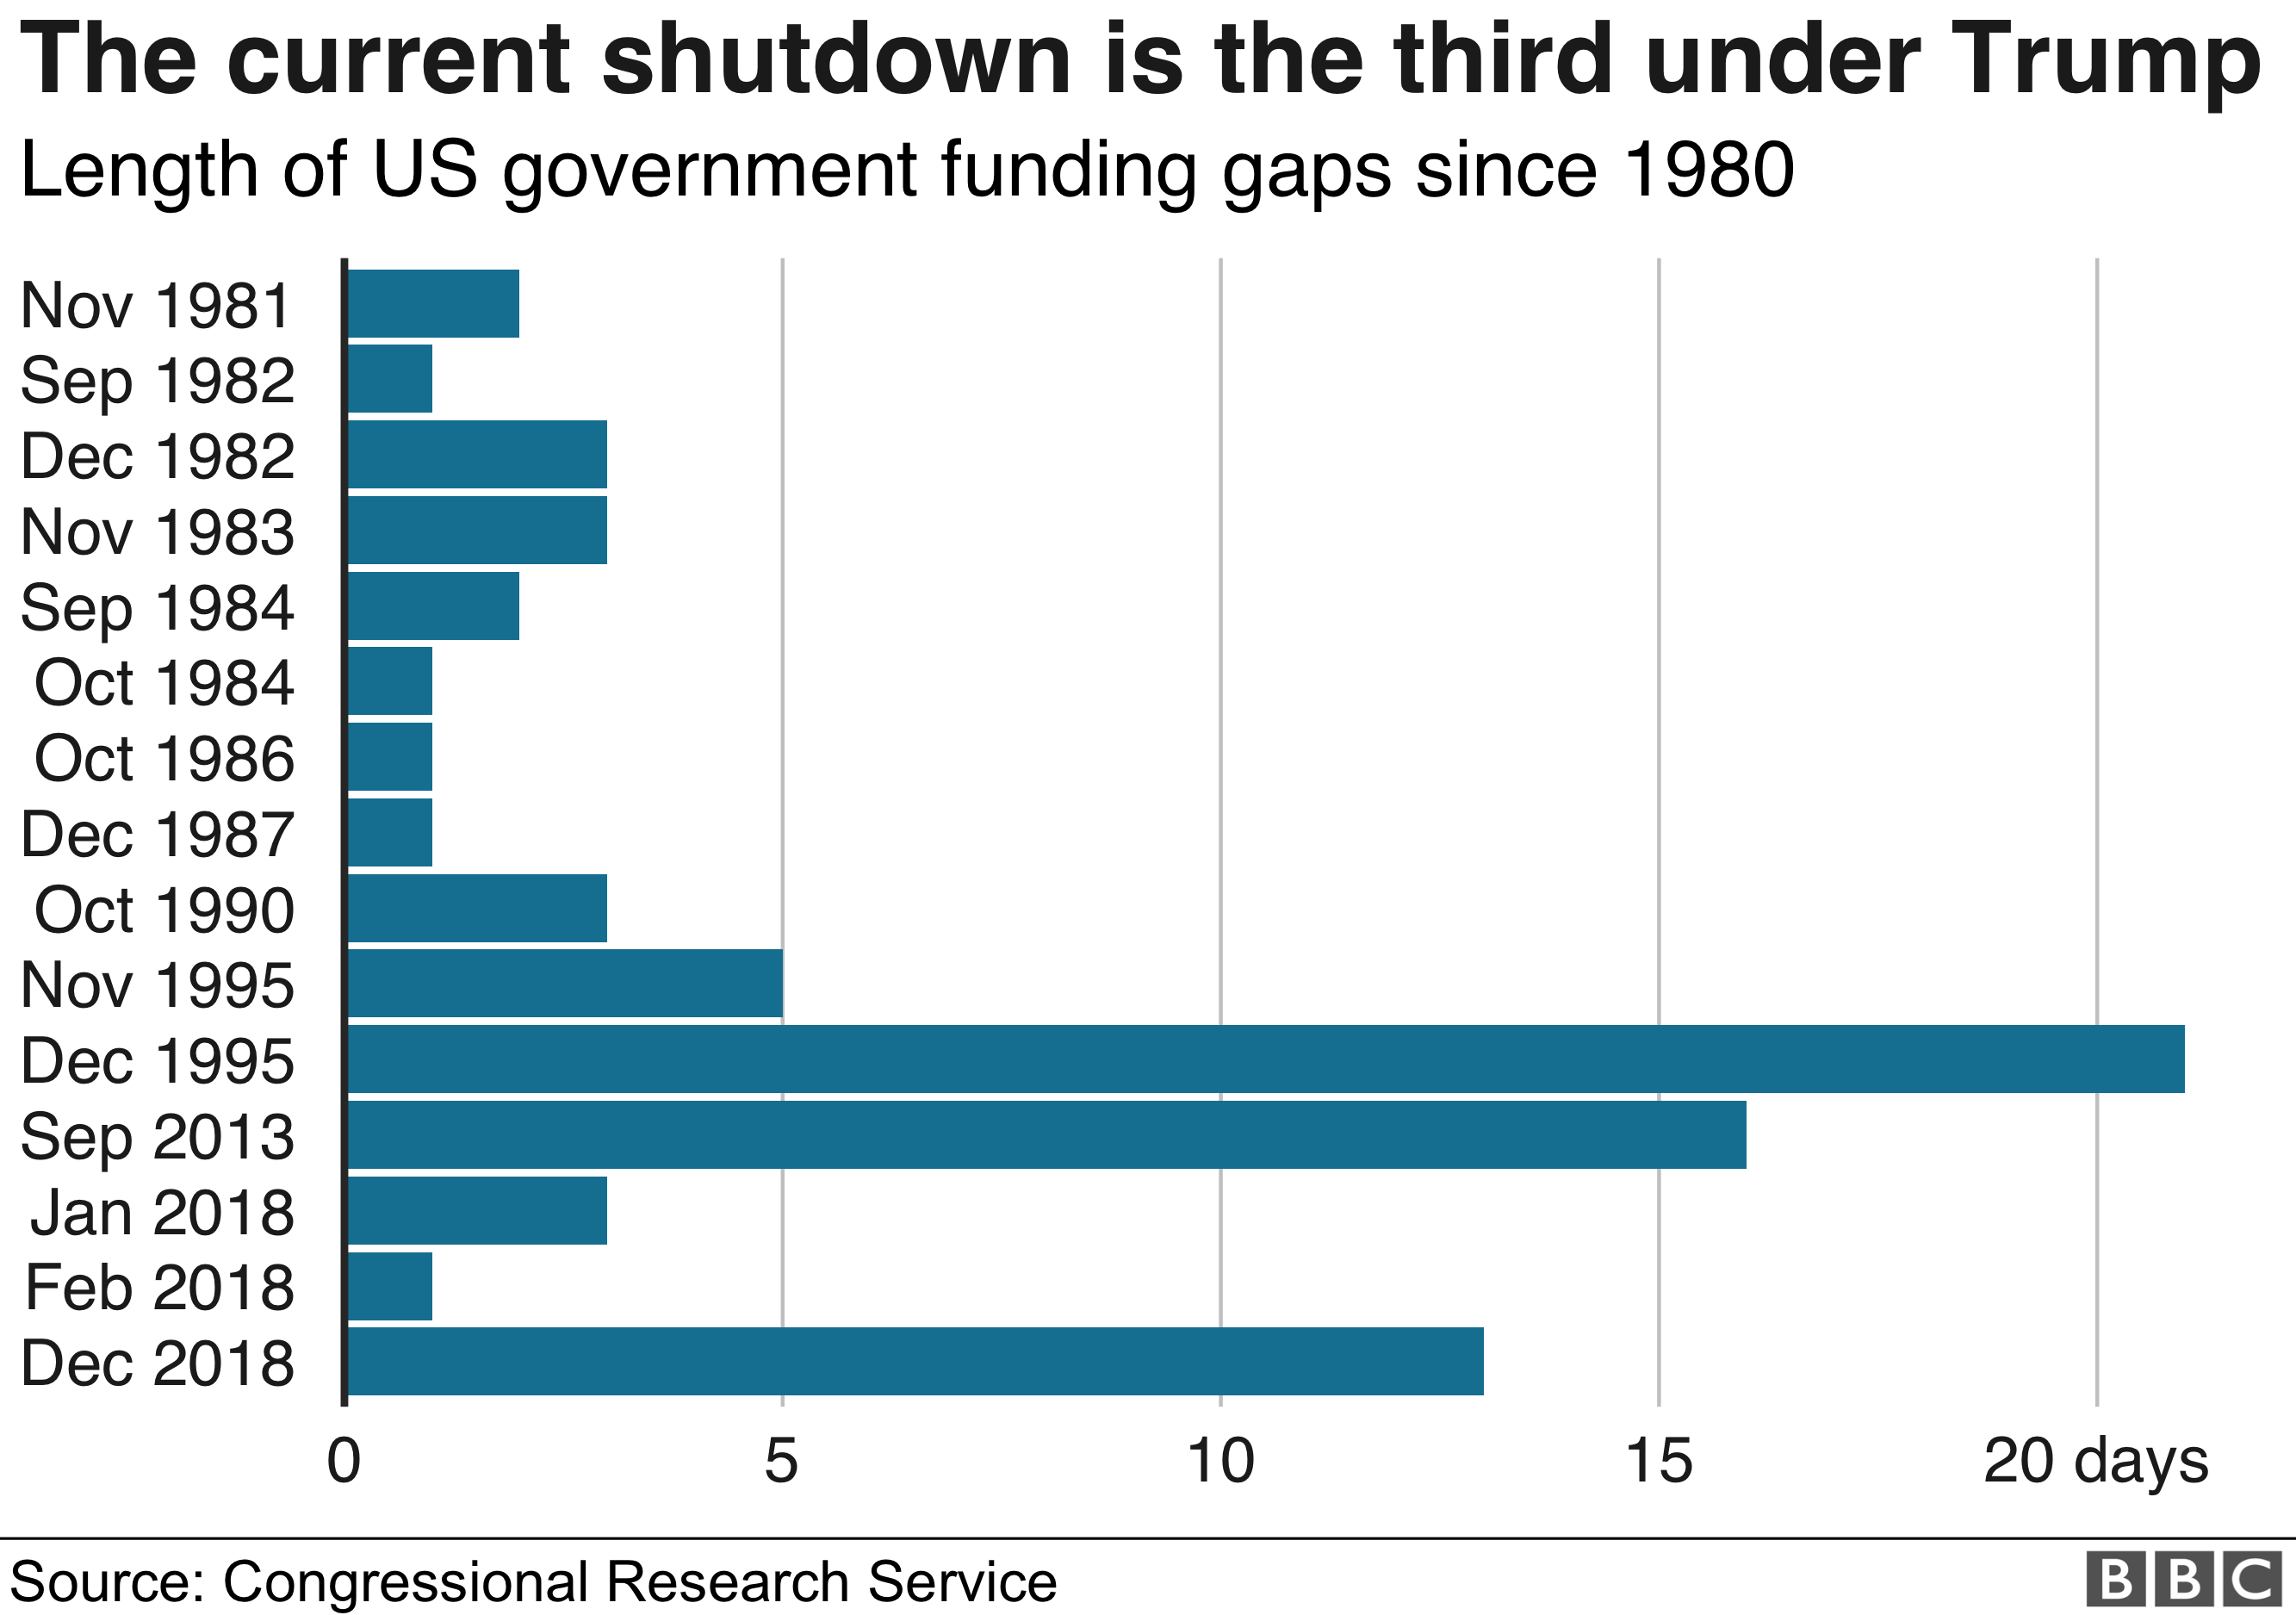 Chart showing how the current US shutdown compares in length to previous funding gaps. It is currently the third longest shutdown since 1980.